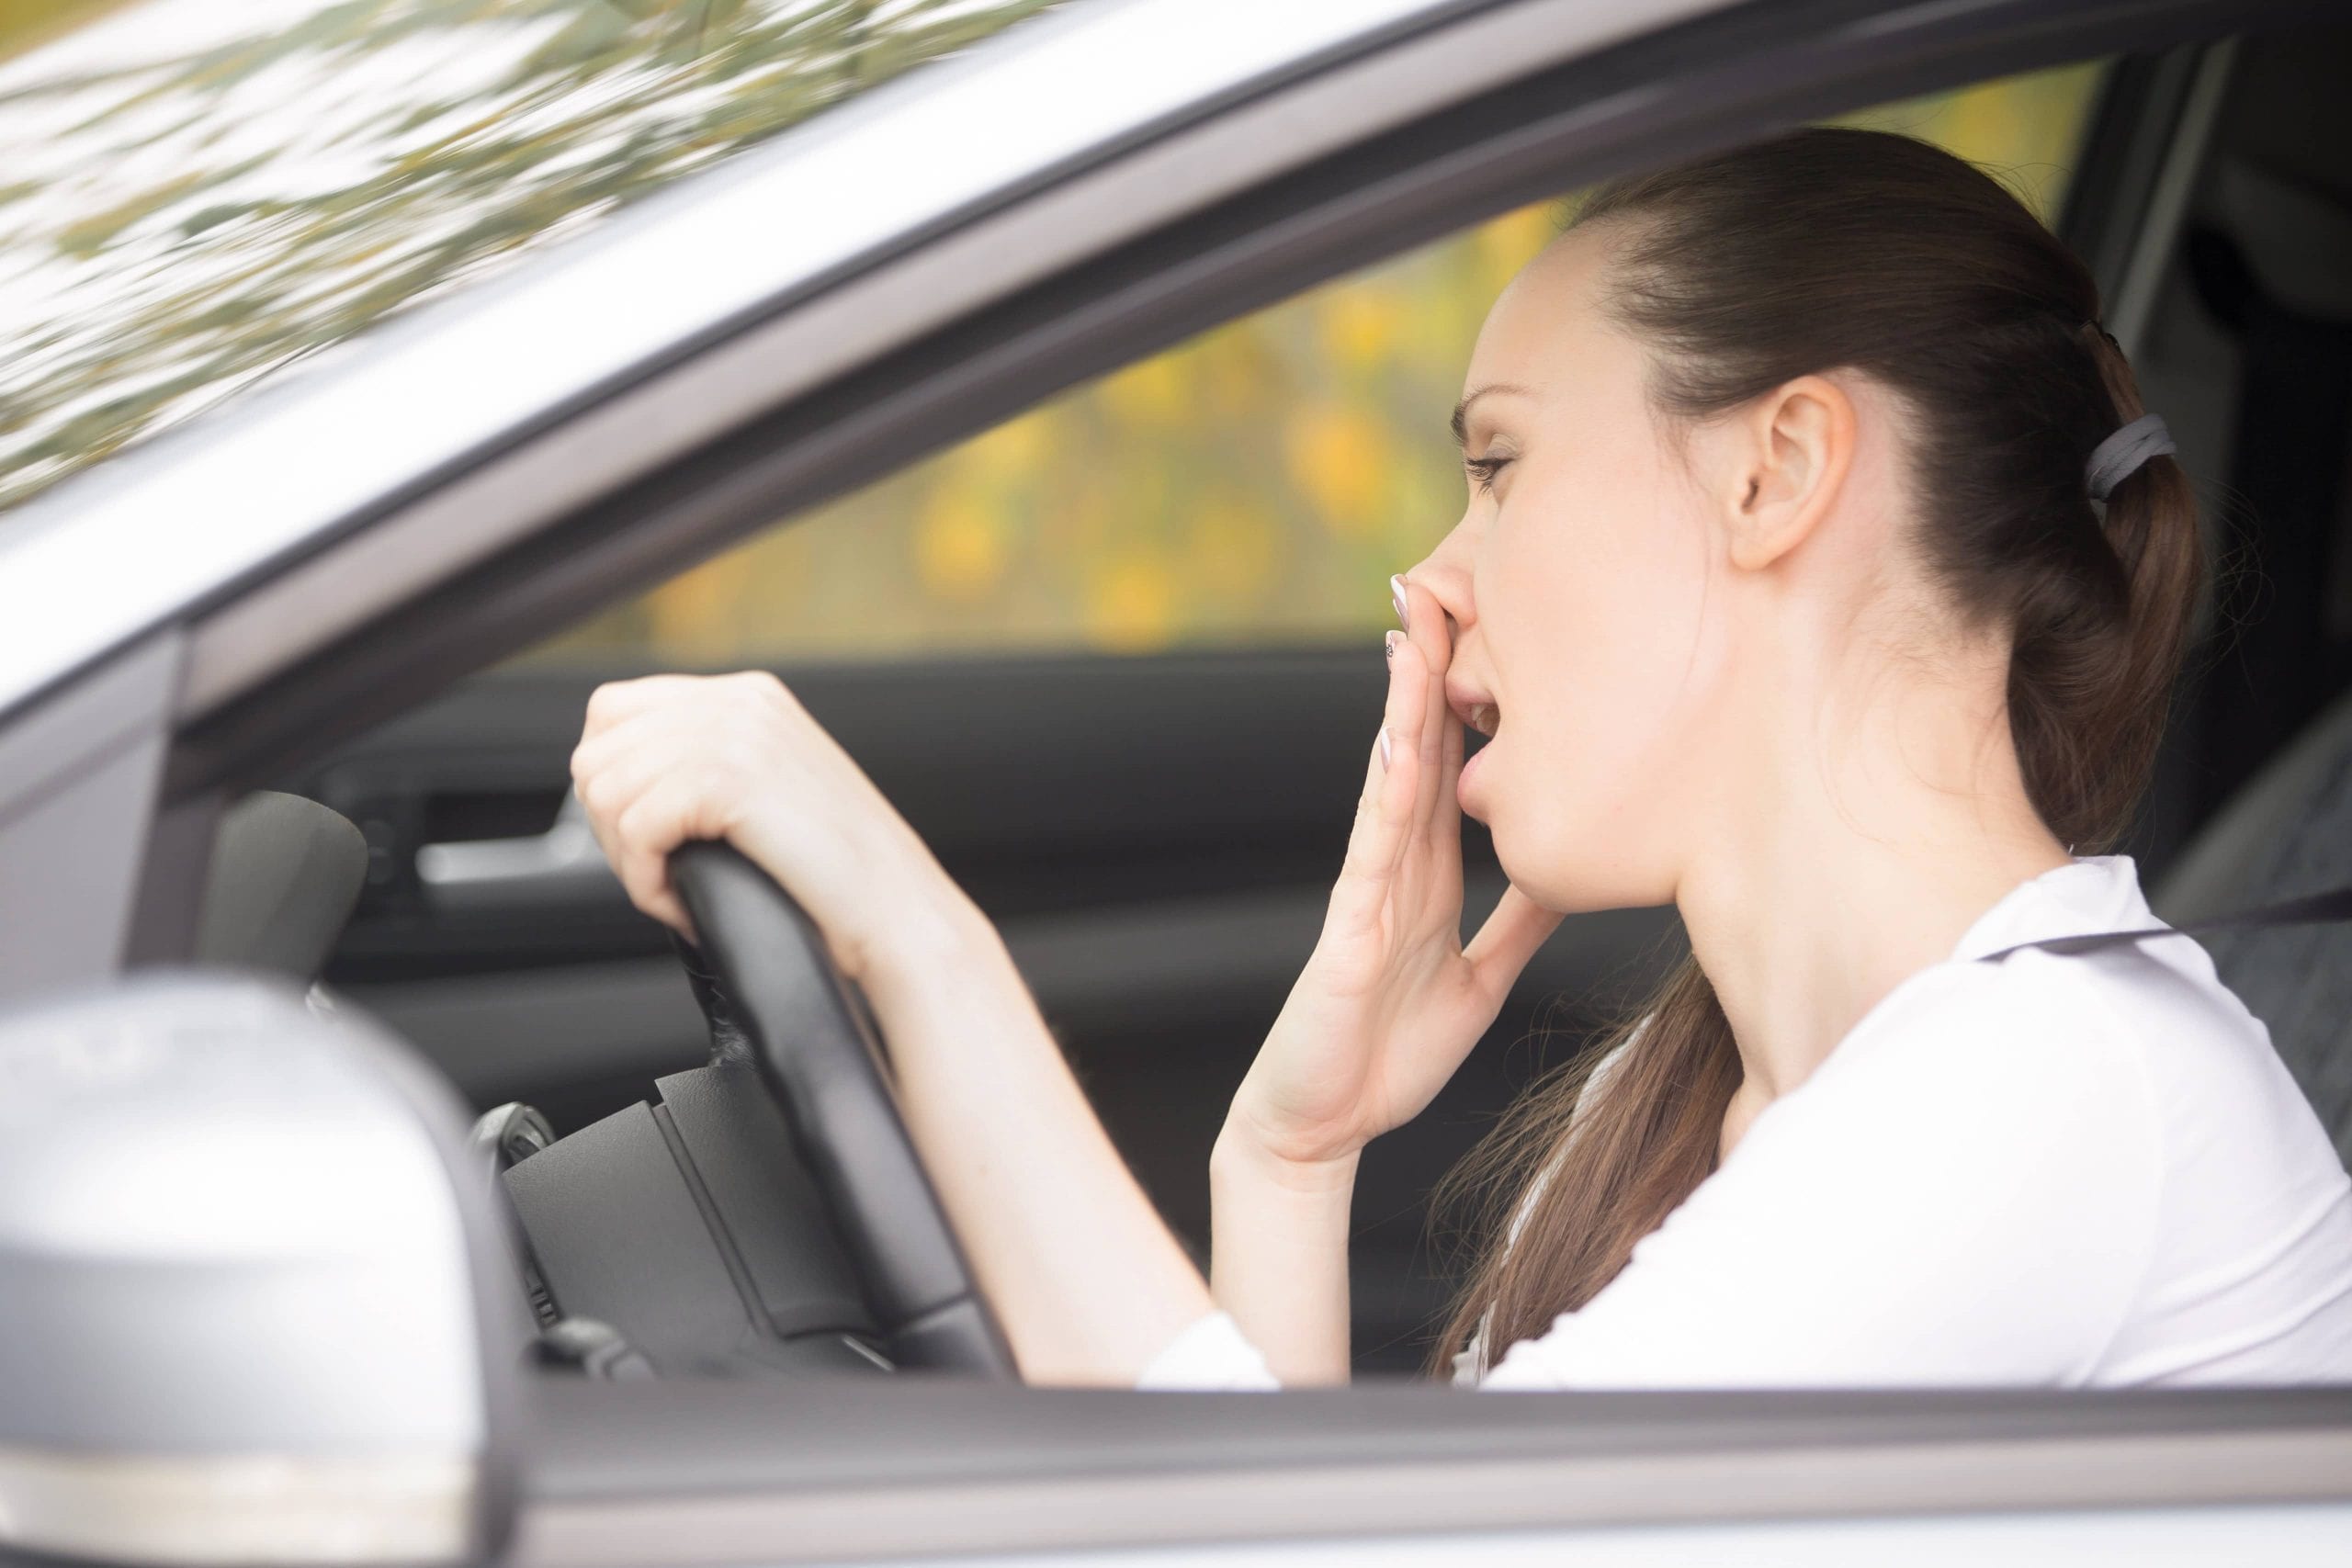 New Survey Shows Driver Fatigue is a Major Issue for Transportation Companies